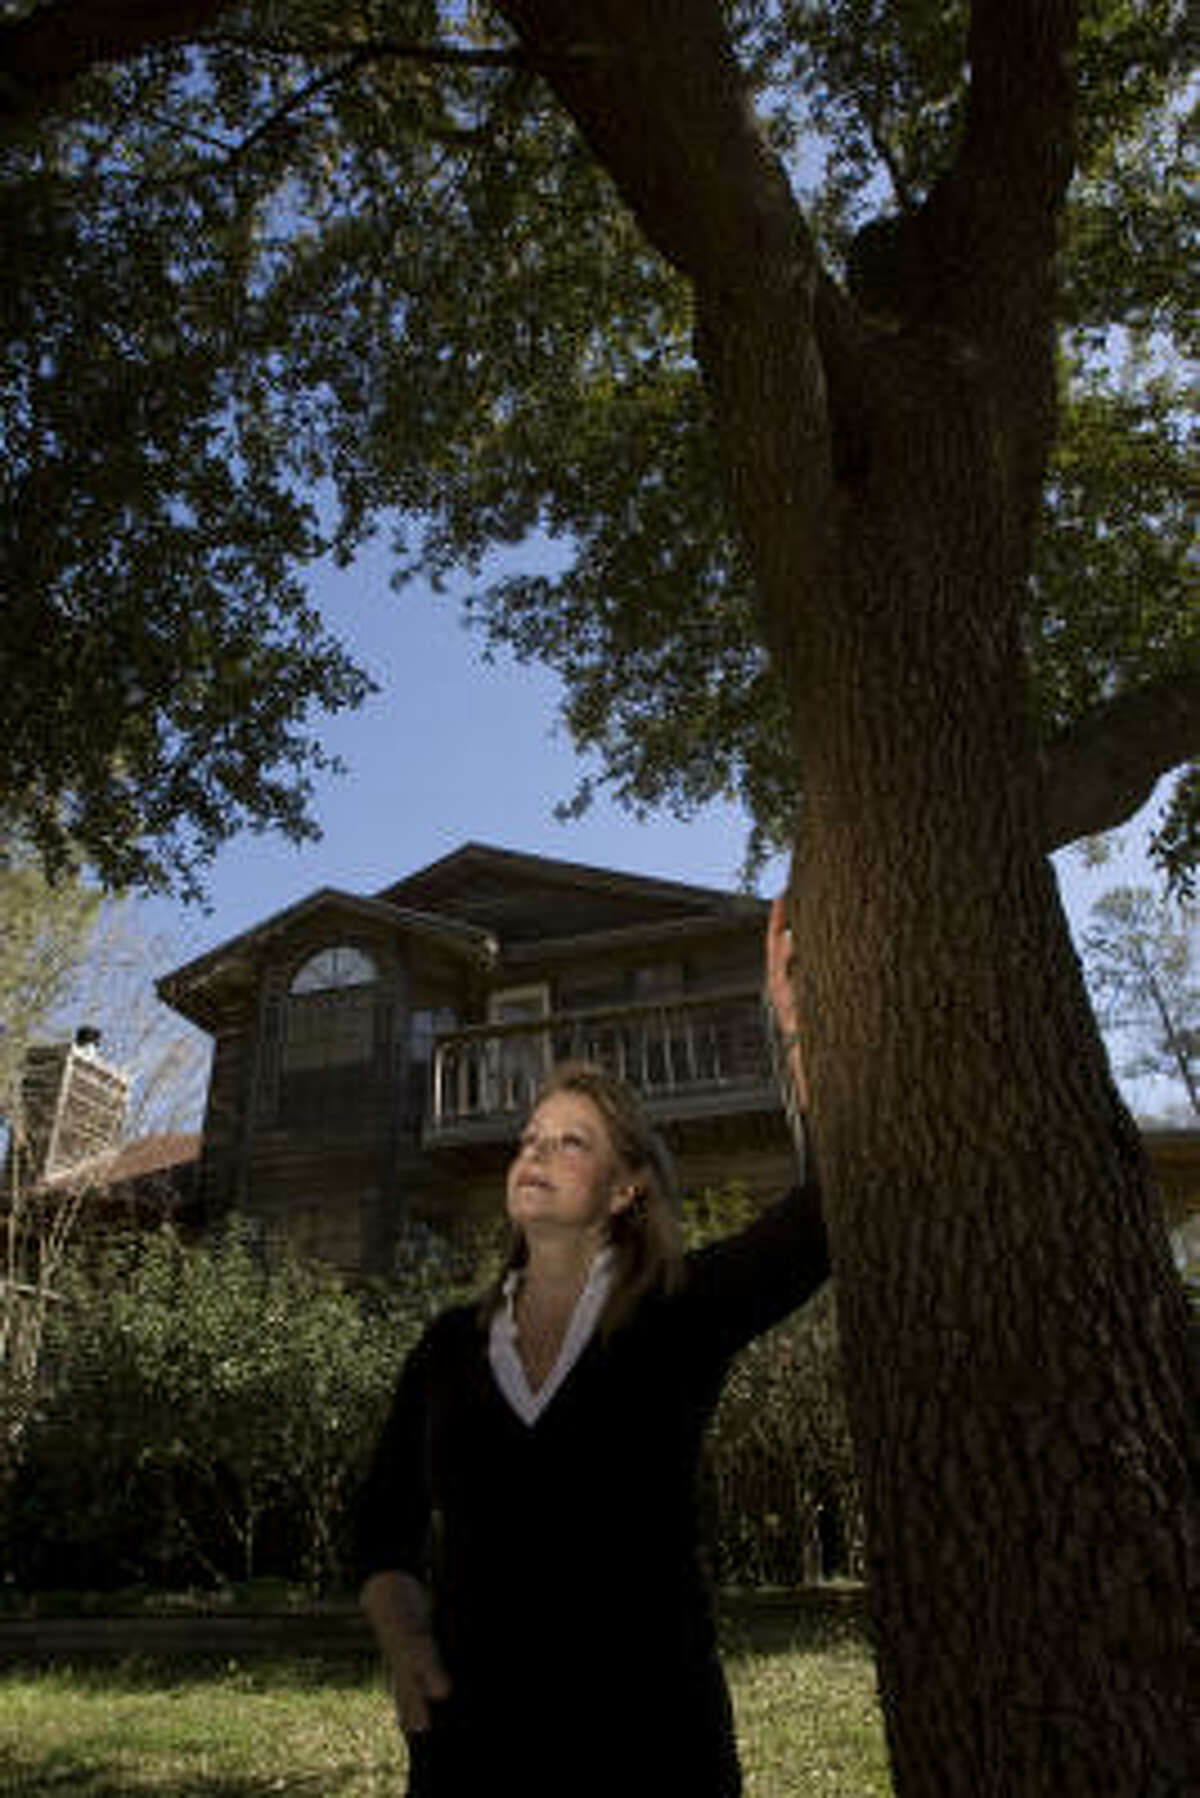 Janice Saunders is moving out of her dream home in Humble and leaving the live oak tree she planted because she says she has grown weary of worrying about flooding.﻿